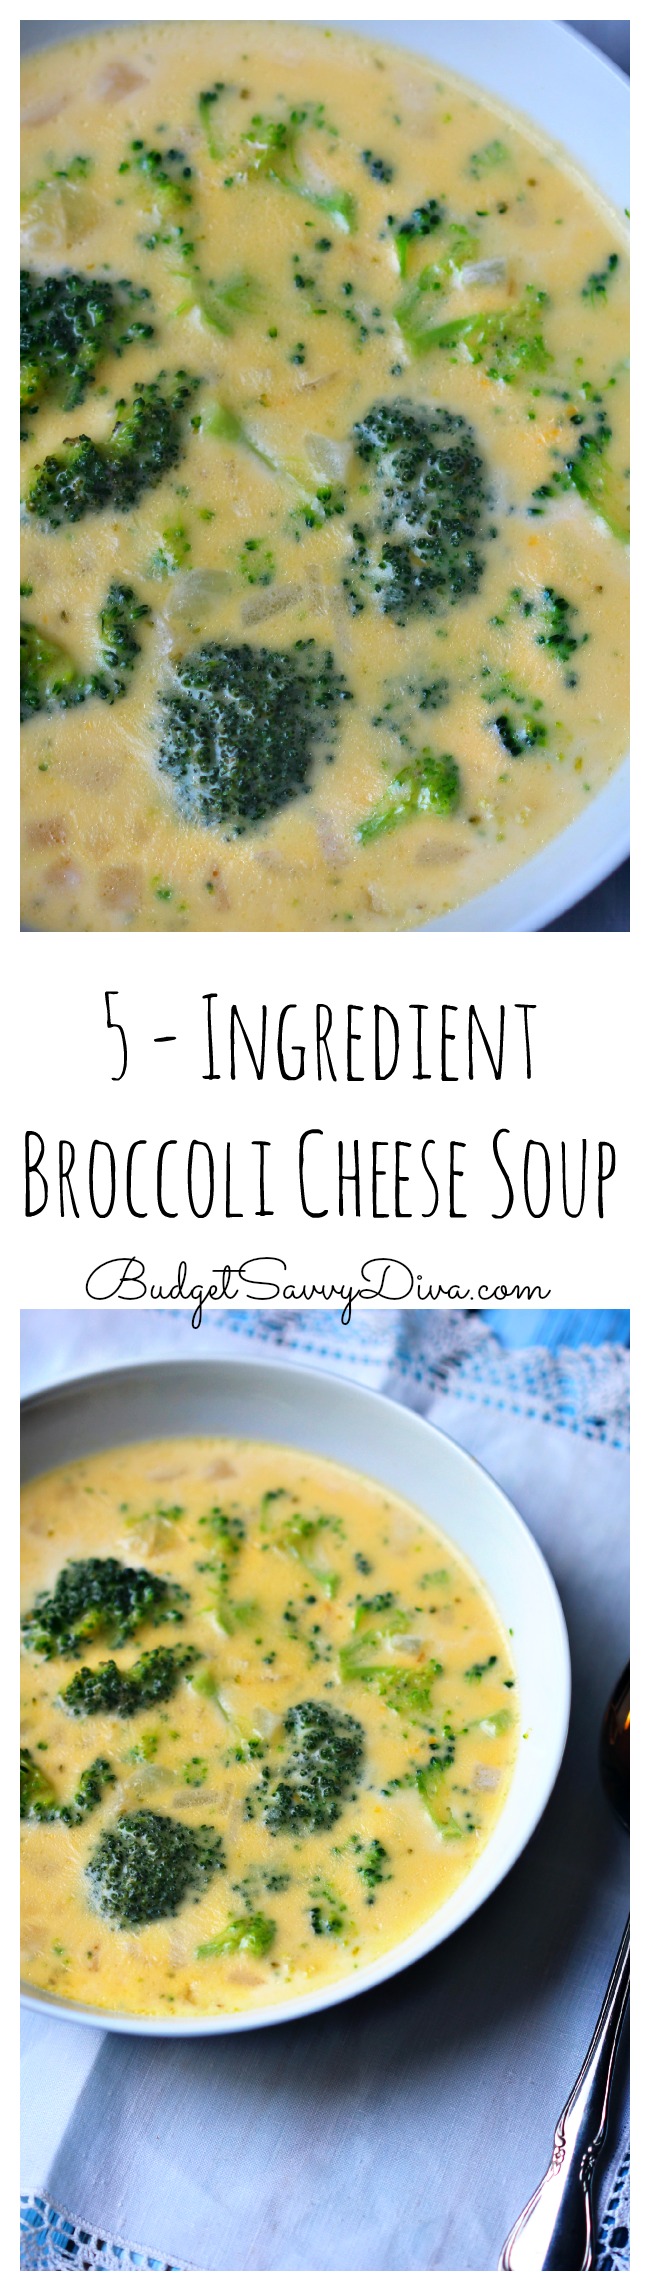 5 - Ingredient Broccoli Cheese Soup Recipe  